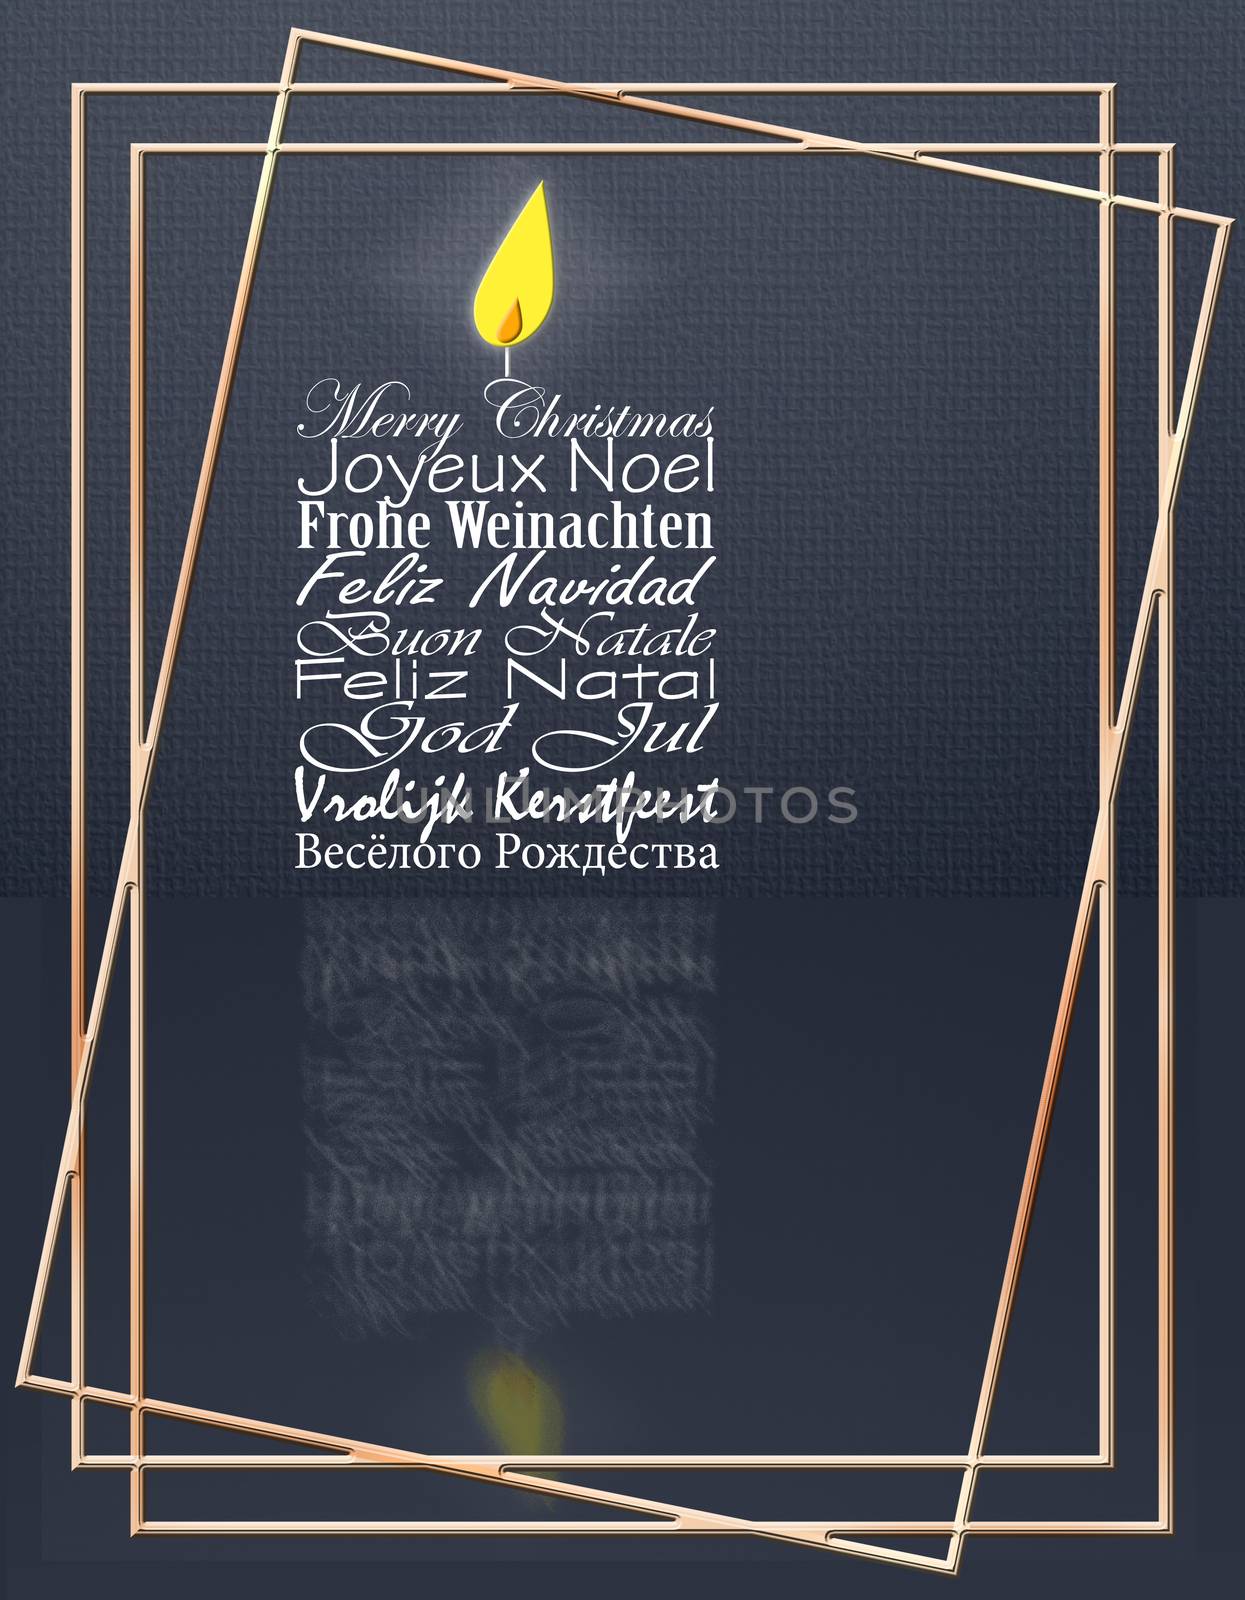 Merry Christmas wishes corporate bisuness card in European languages by NelliPolk